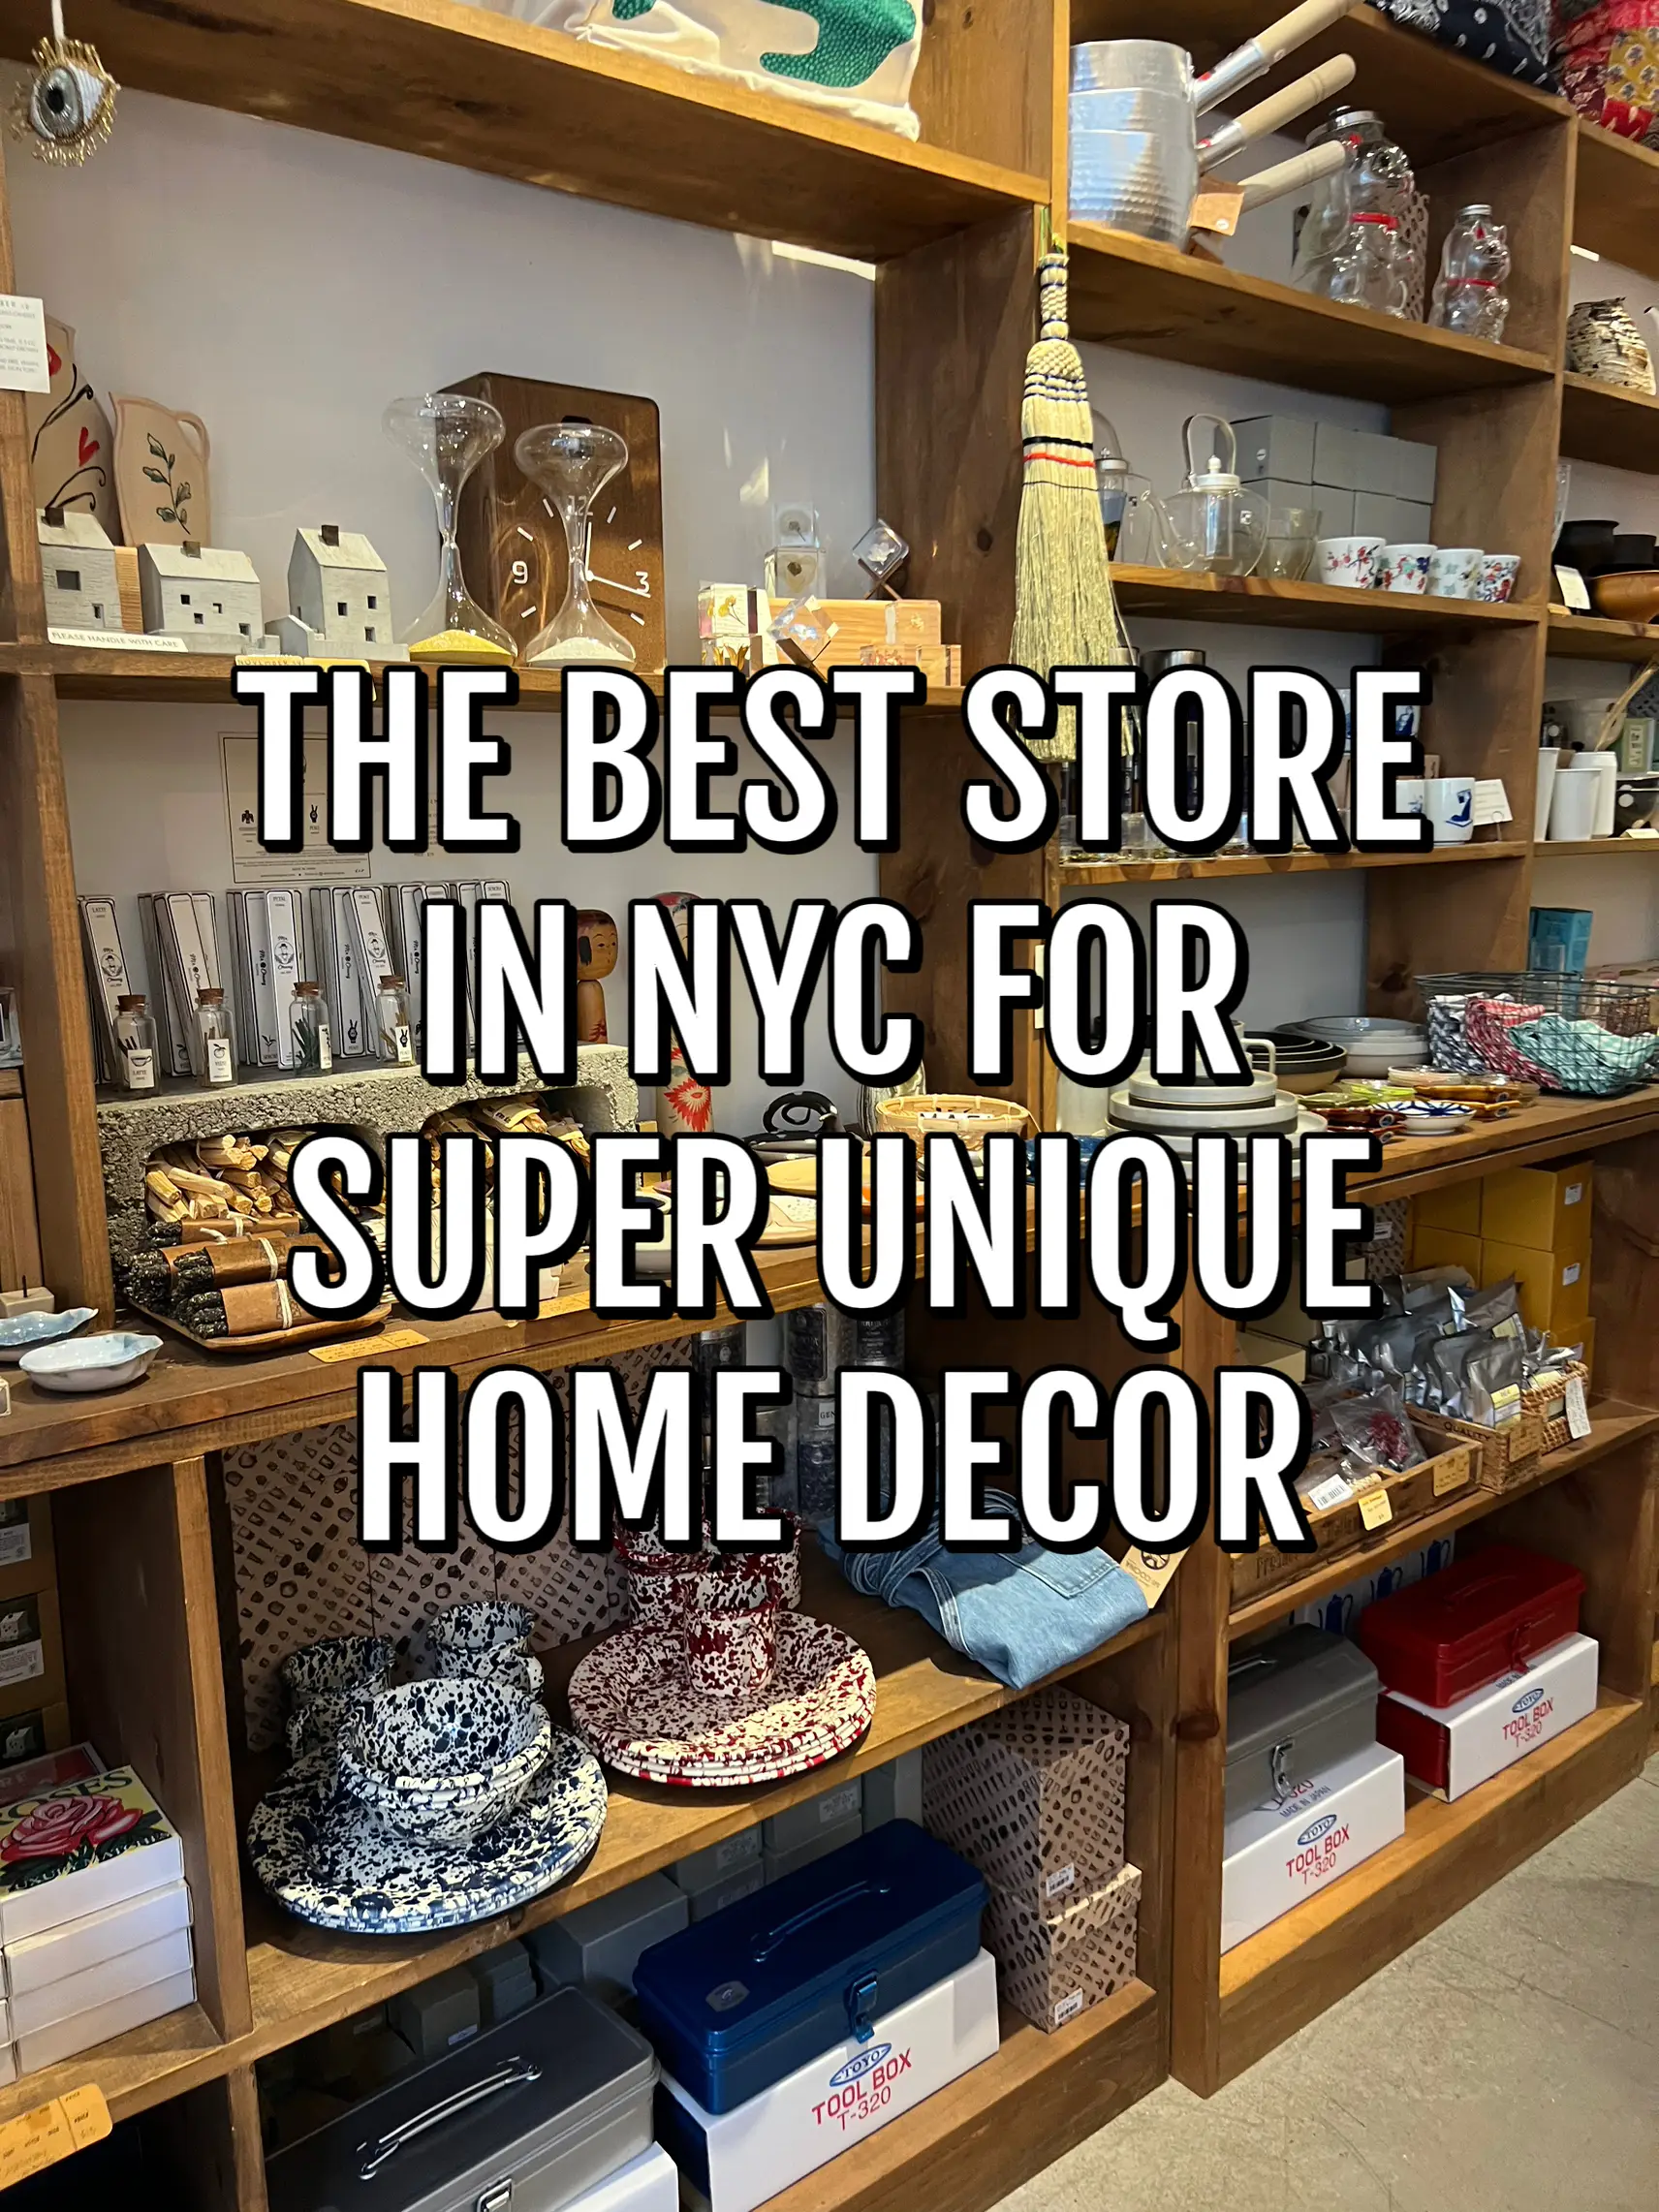 Where to find home decor no one else has in NYC! | Gallery posted ...